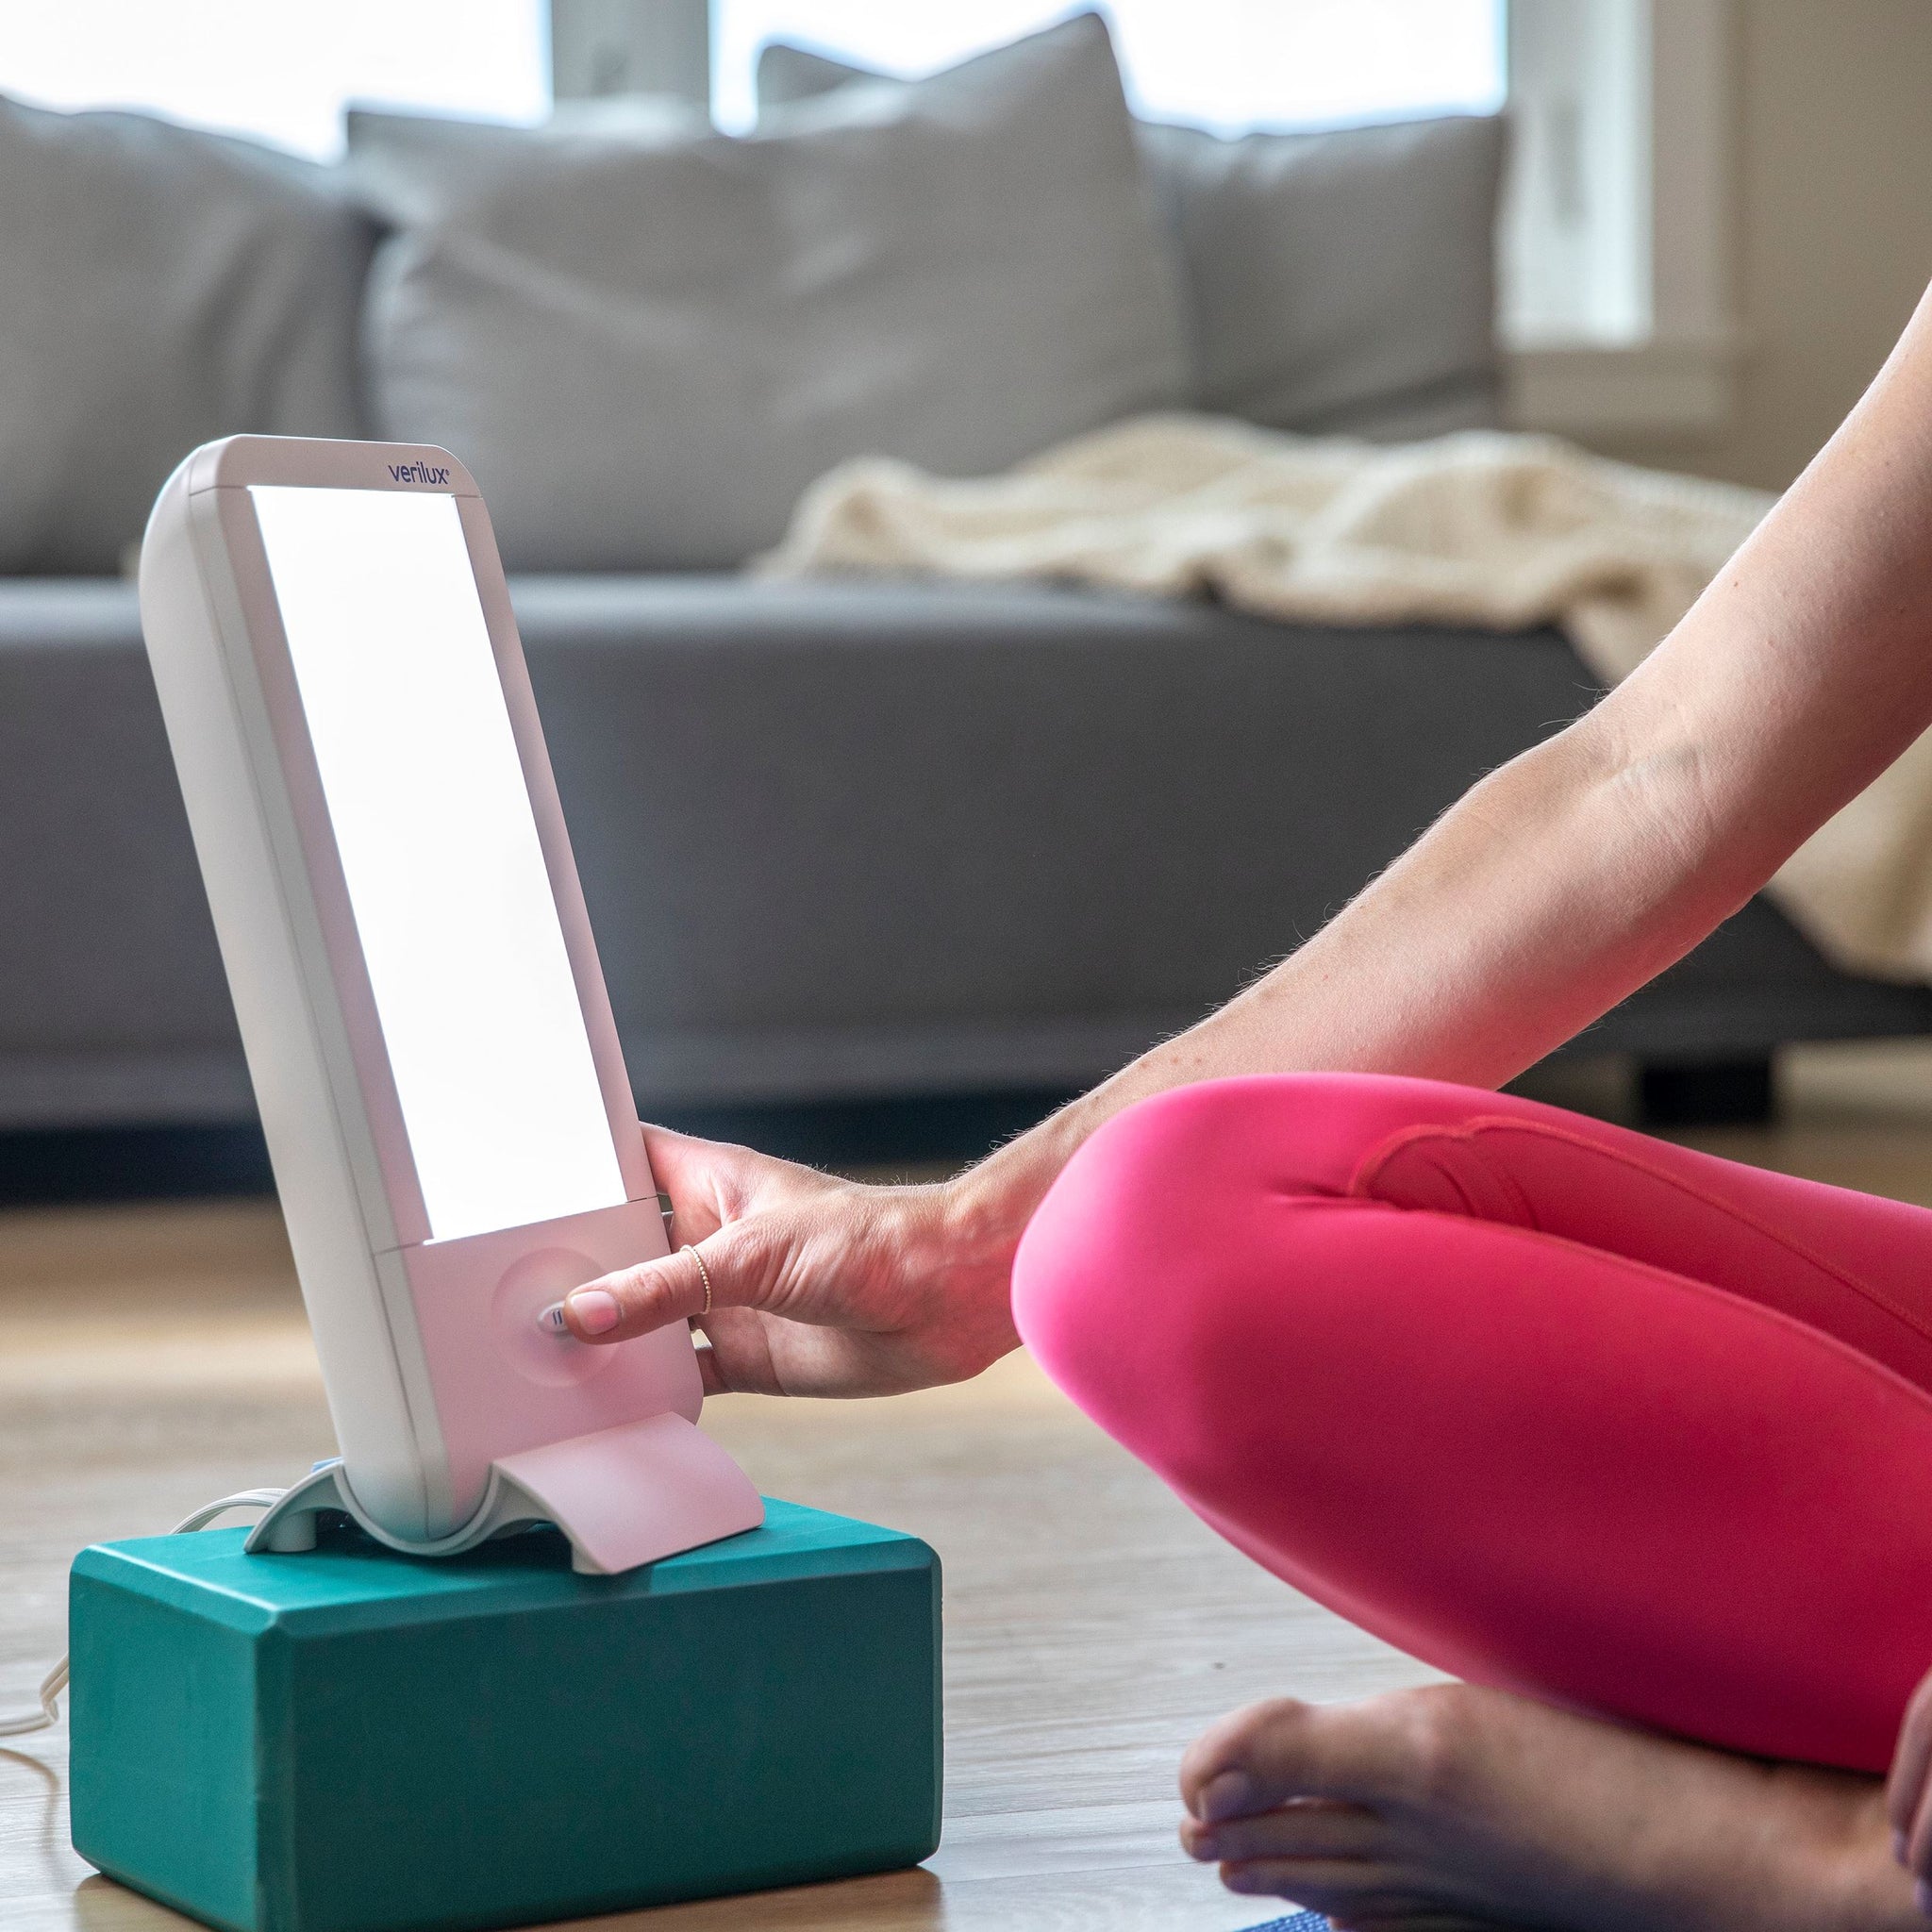 Verilux HappyLight Full-Size Light Therapy Lamp